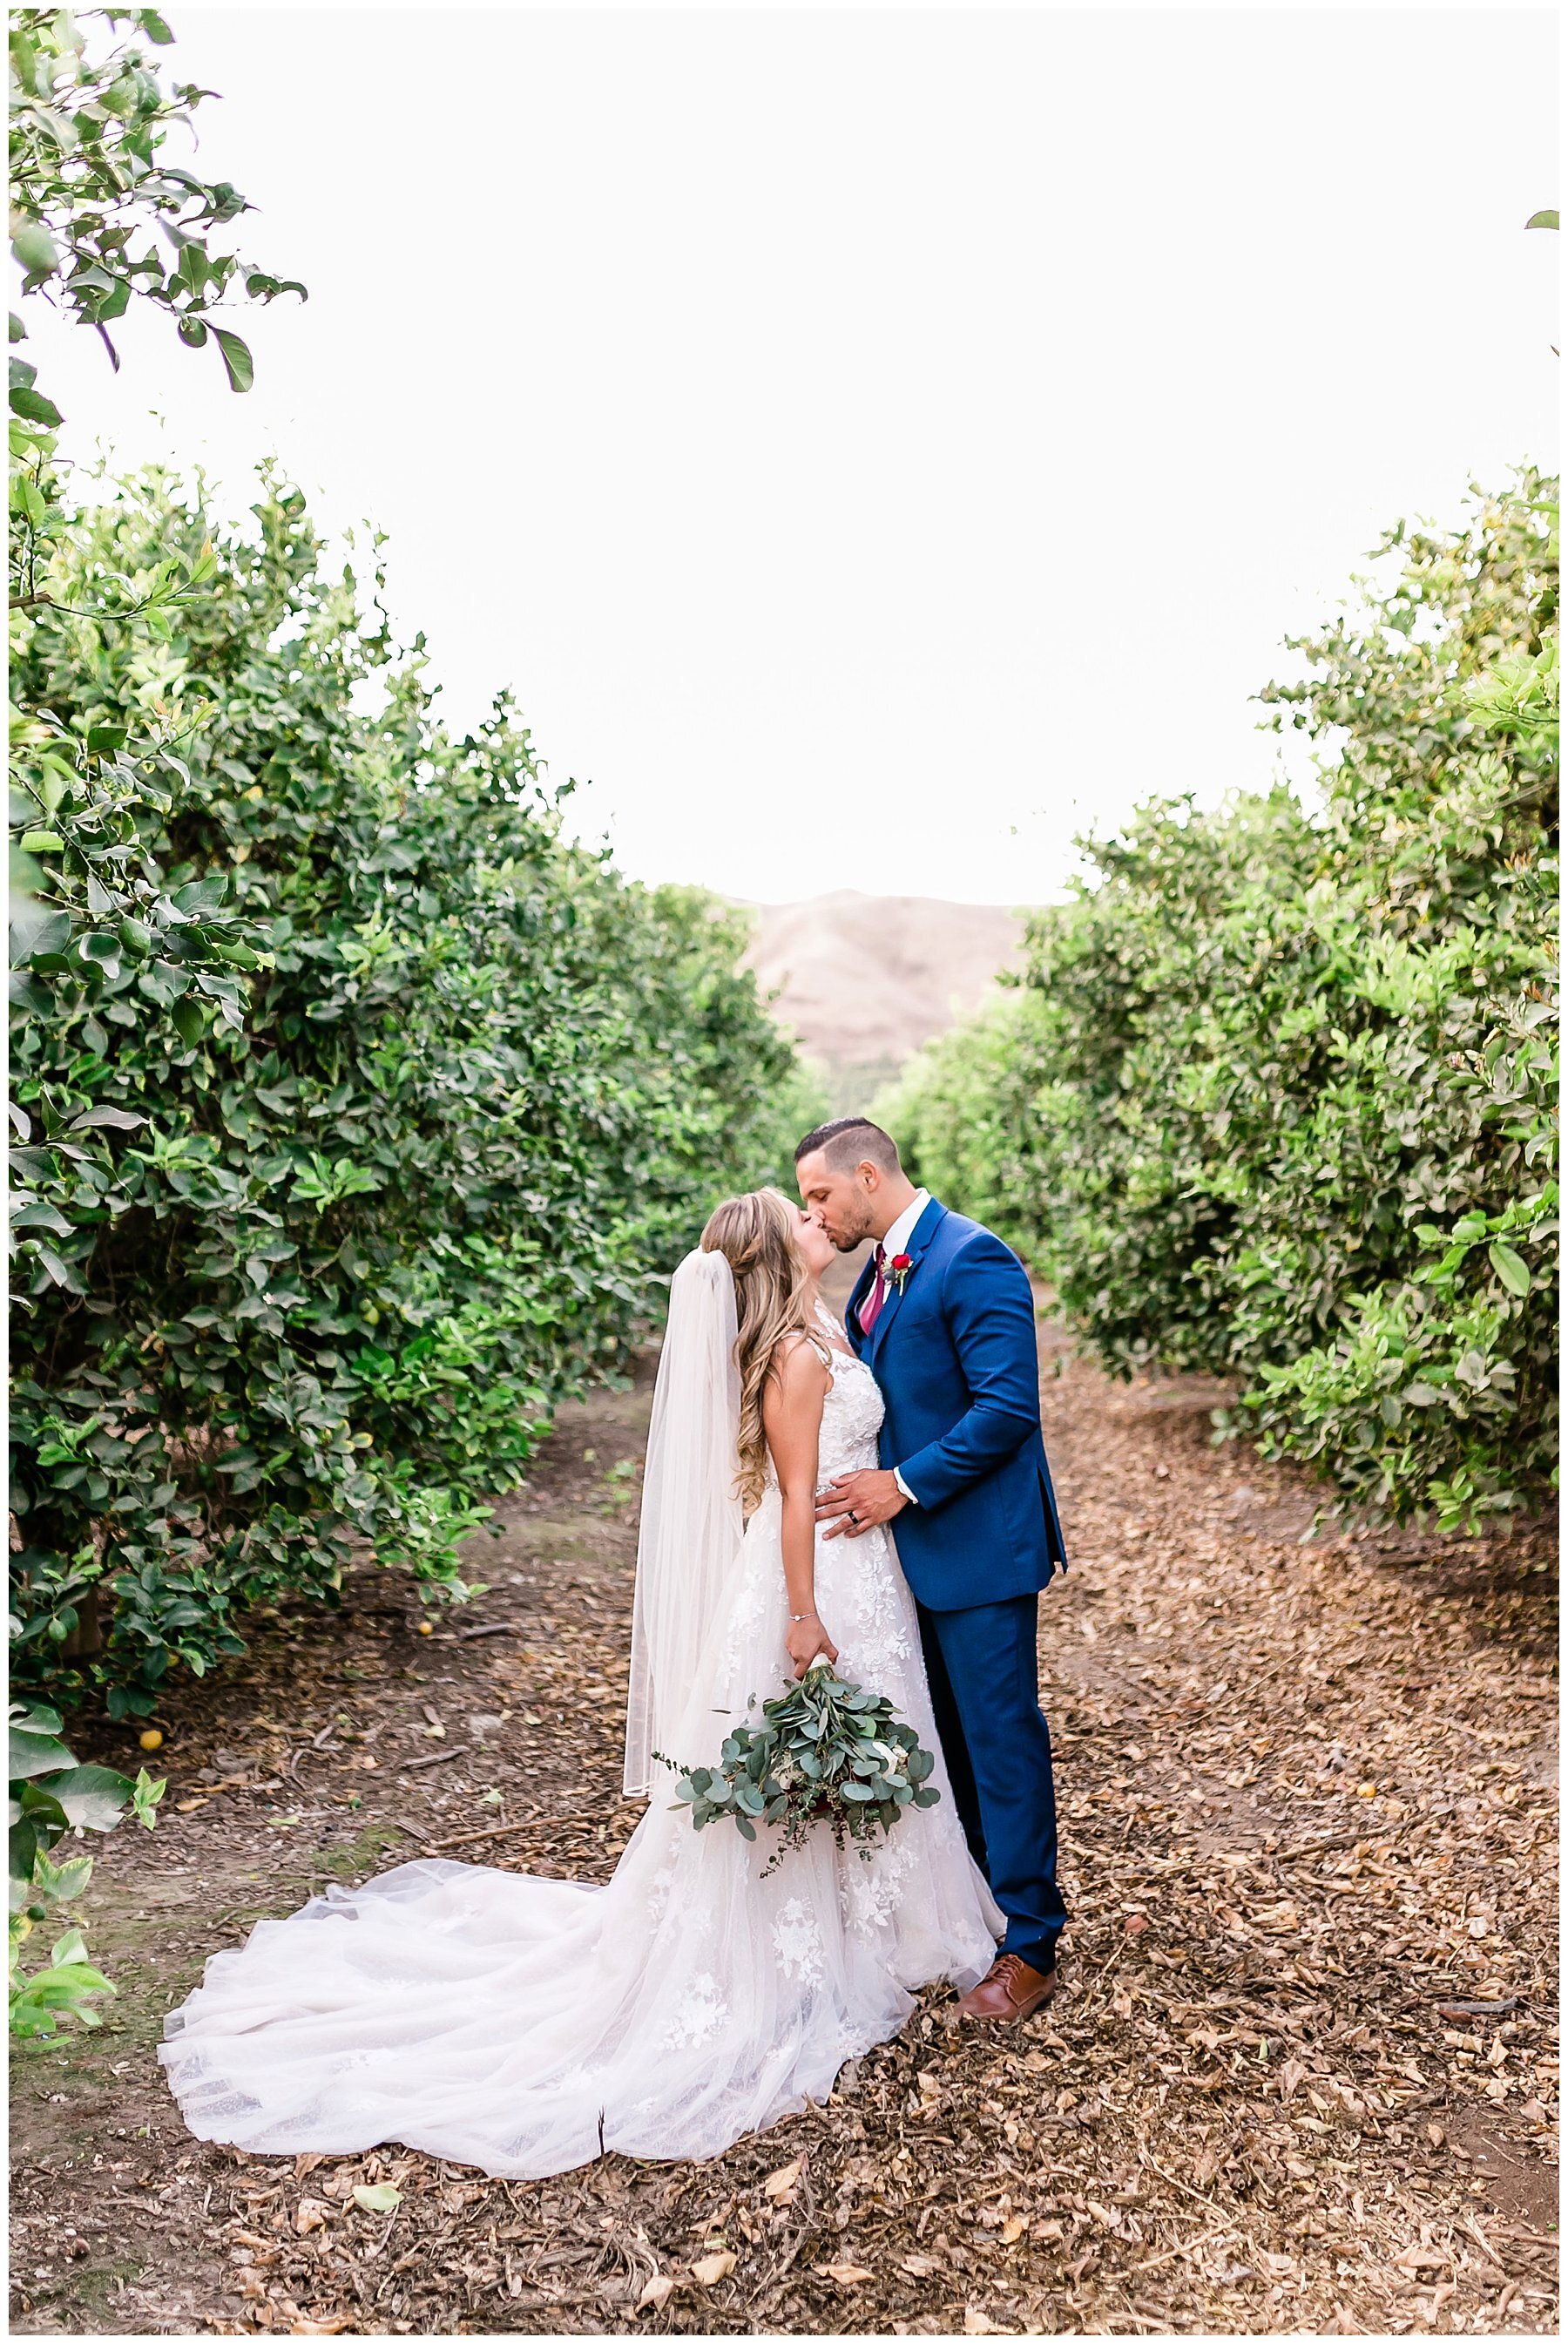  bride and groom together on a dirt path flanked by hedges 